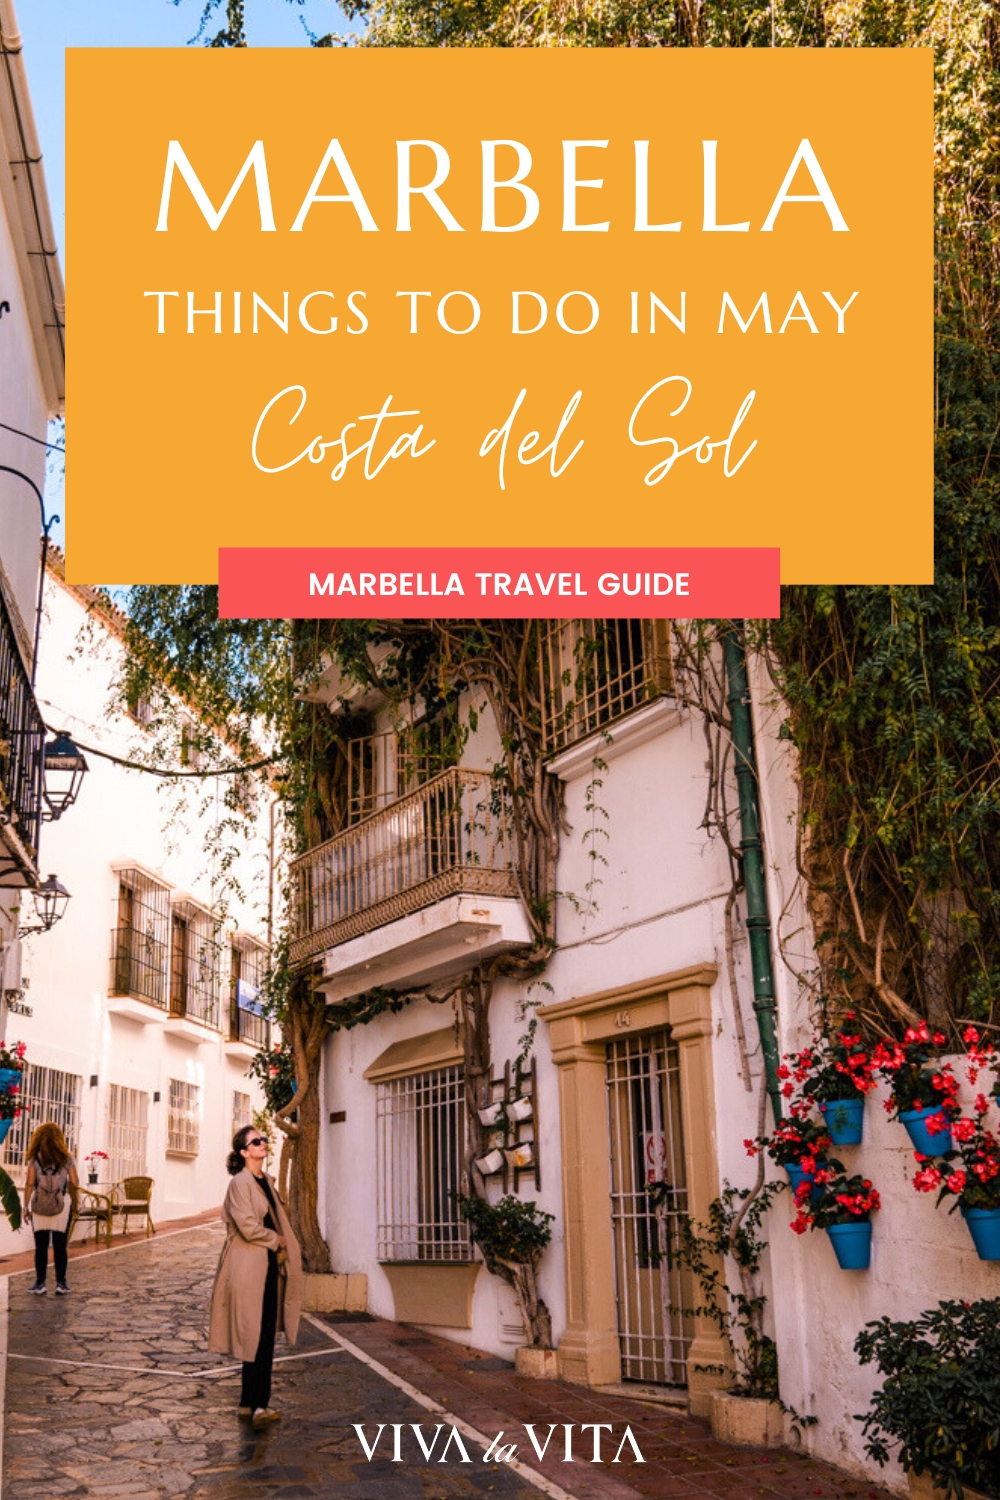 Pinterest image showing the streets of Marbella old town, with a headline that reads: Marbella things to do in May, Costa del Sol, Marbella Travel Guide